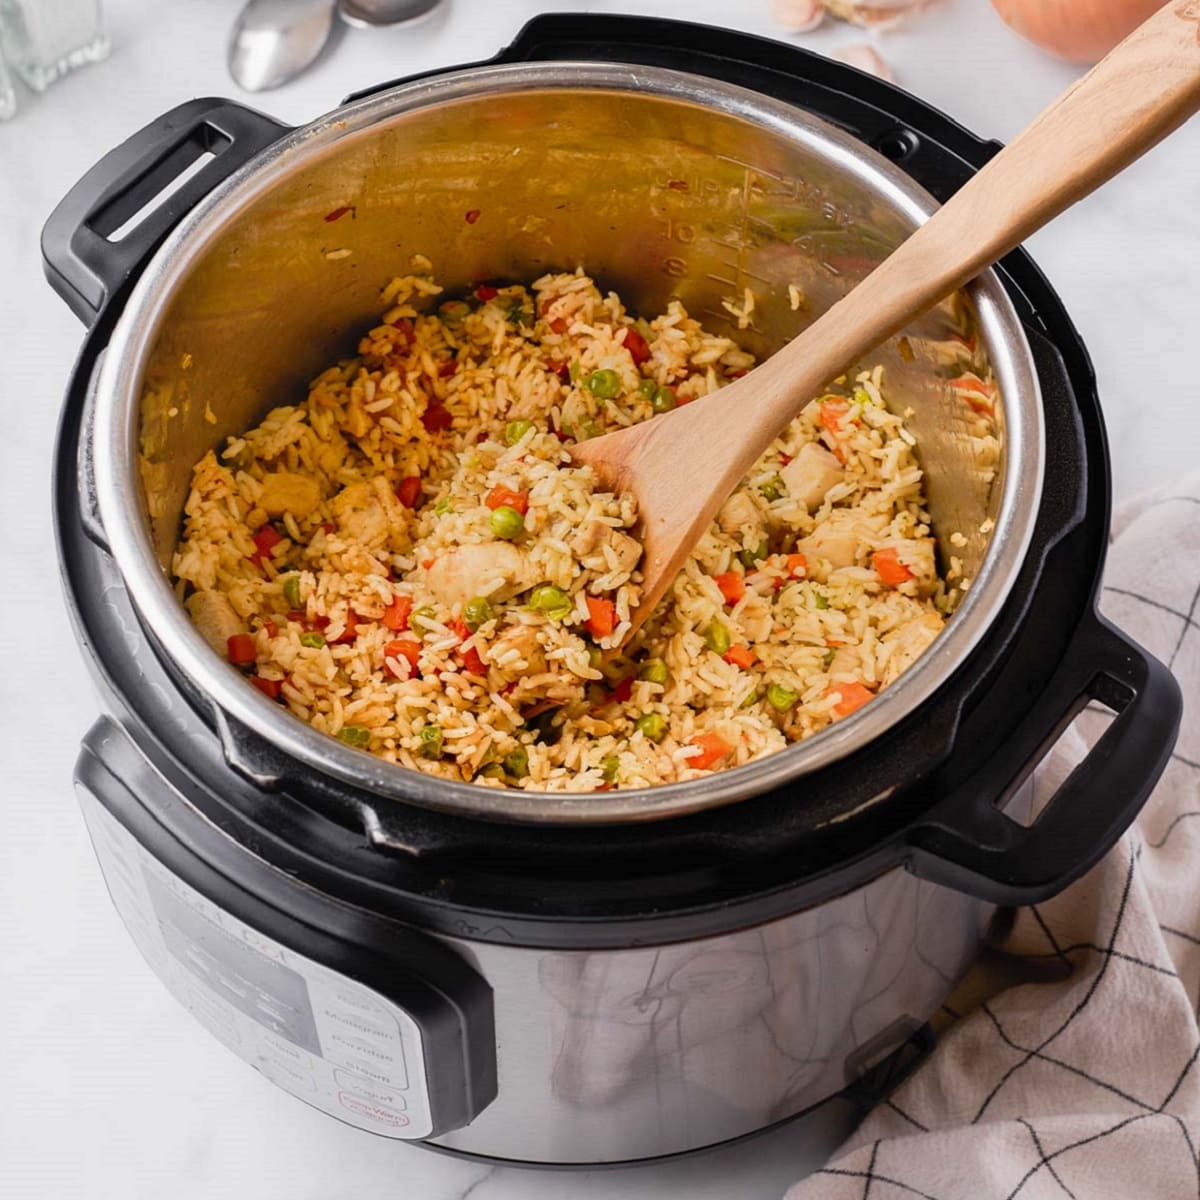 How To Cook Rice And Chicken In A Slow Cooker | Storables